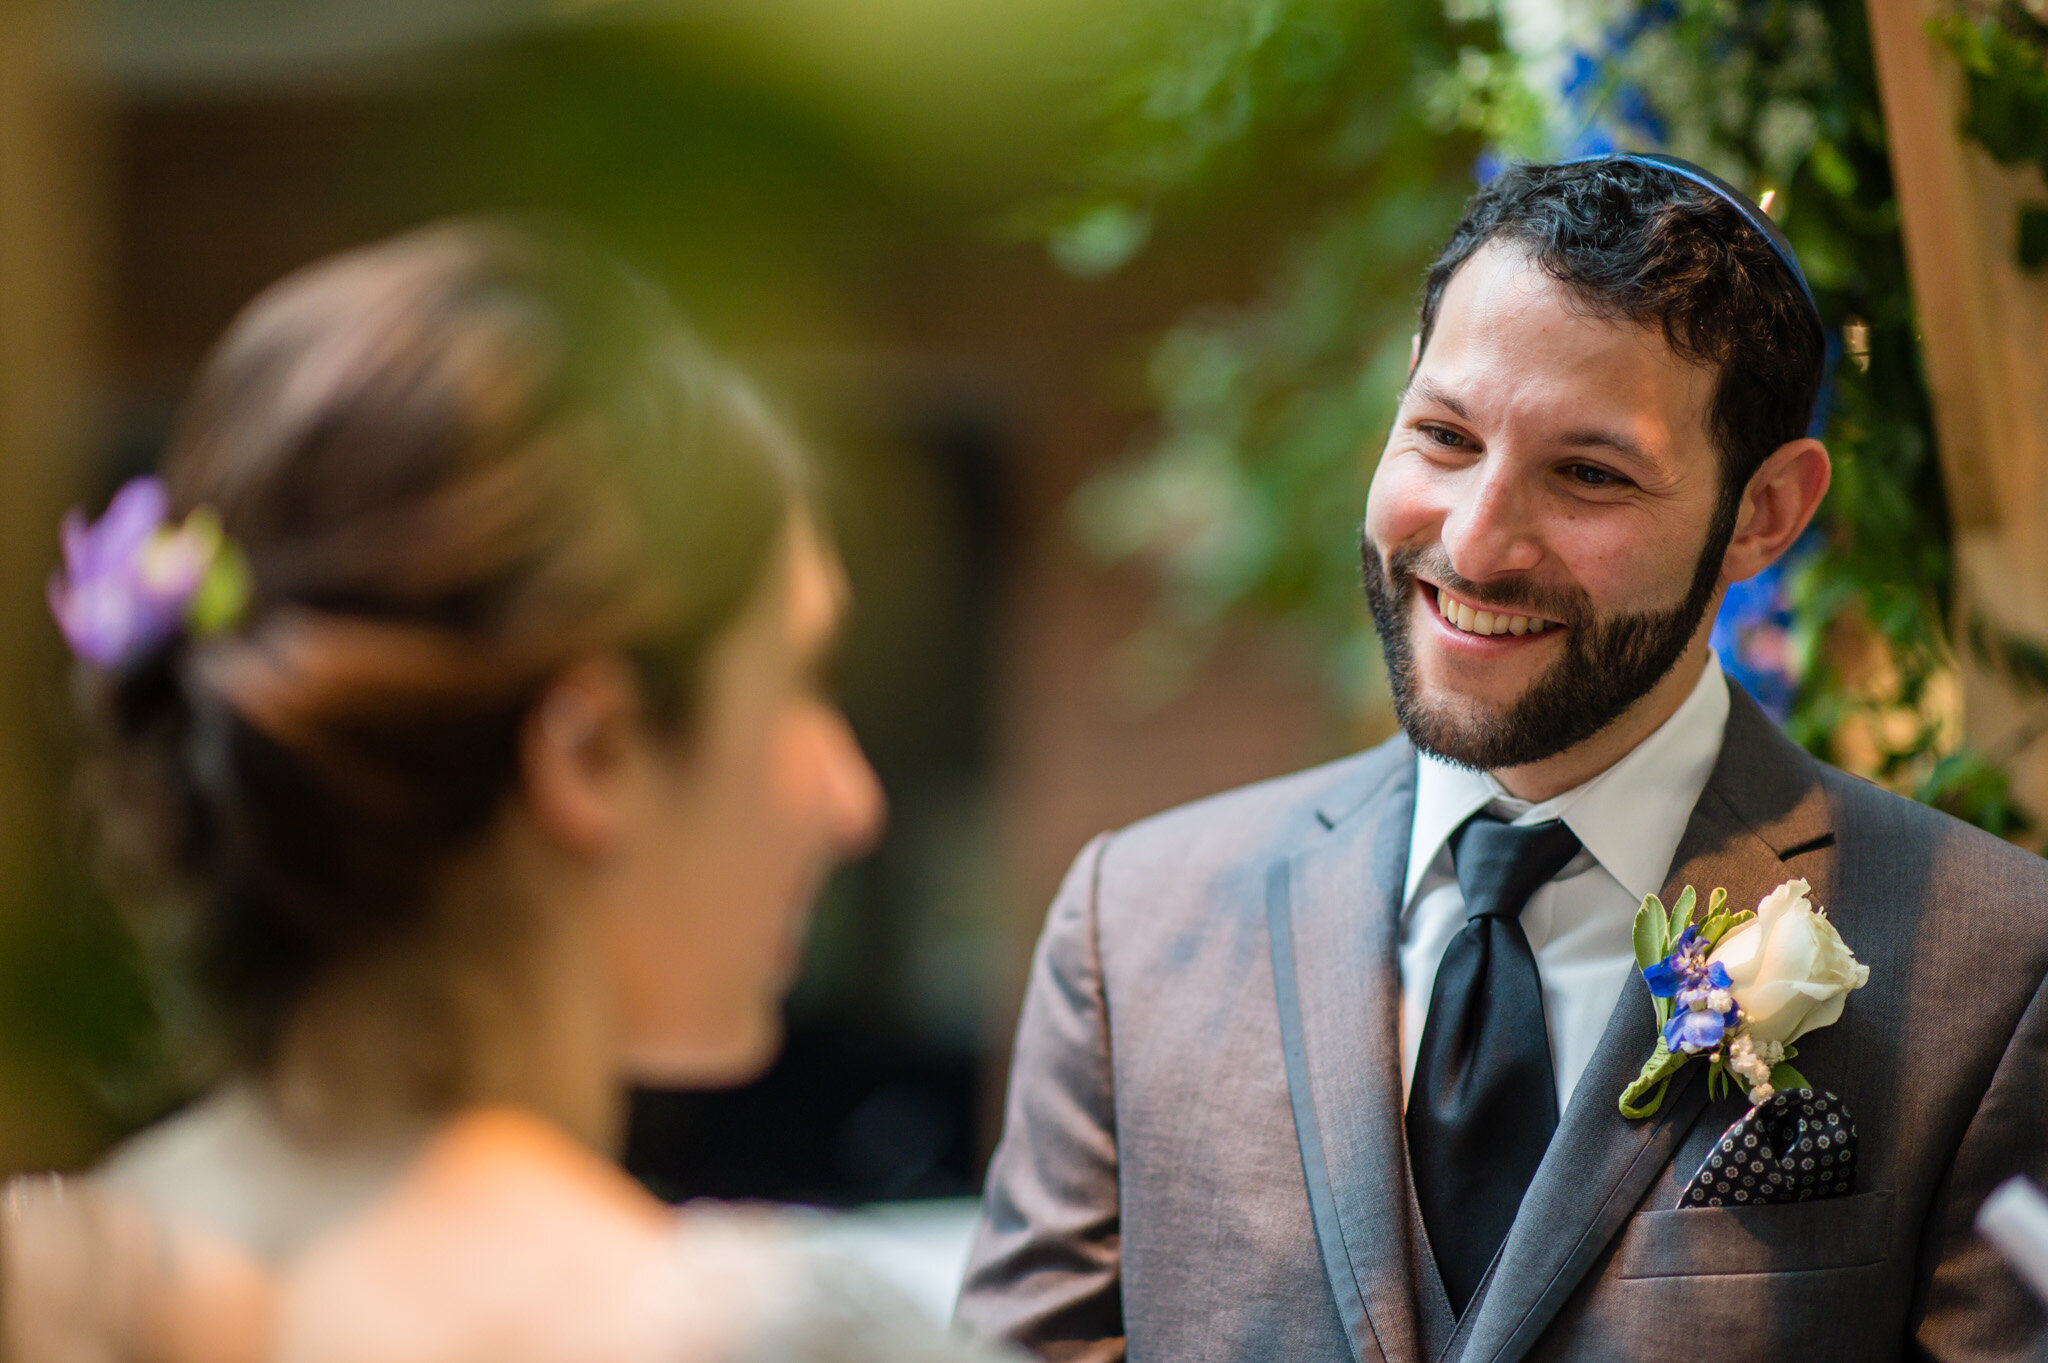 The groom smiles as his bride at their Jewish wedding ceremony